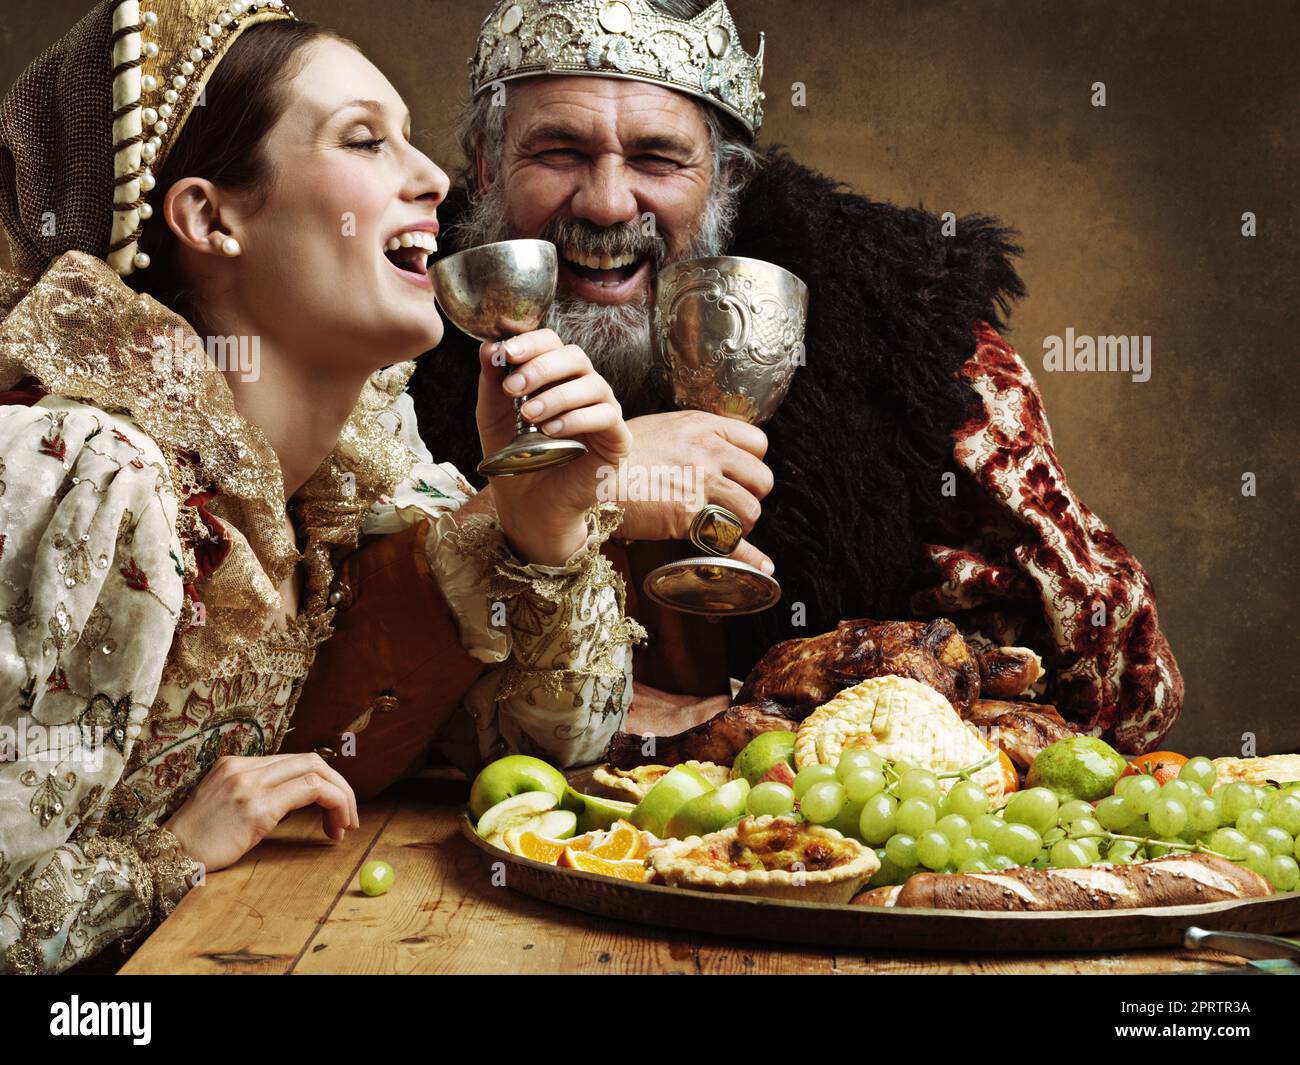 Mead and merriment. A mature king feasting alone in a banquet hall. Stock Photo